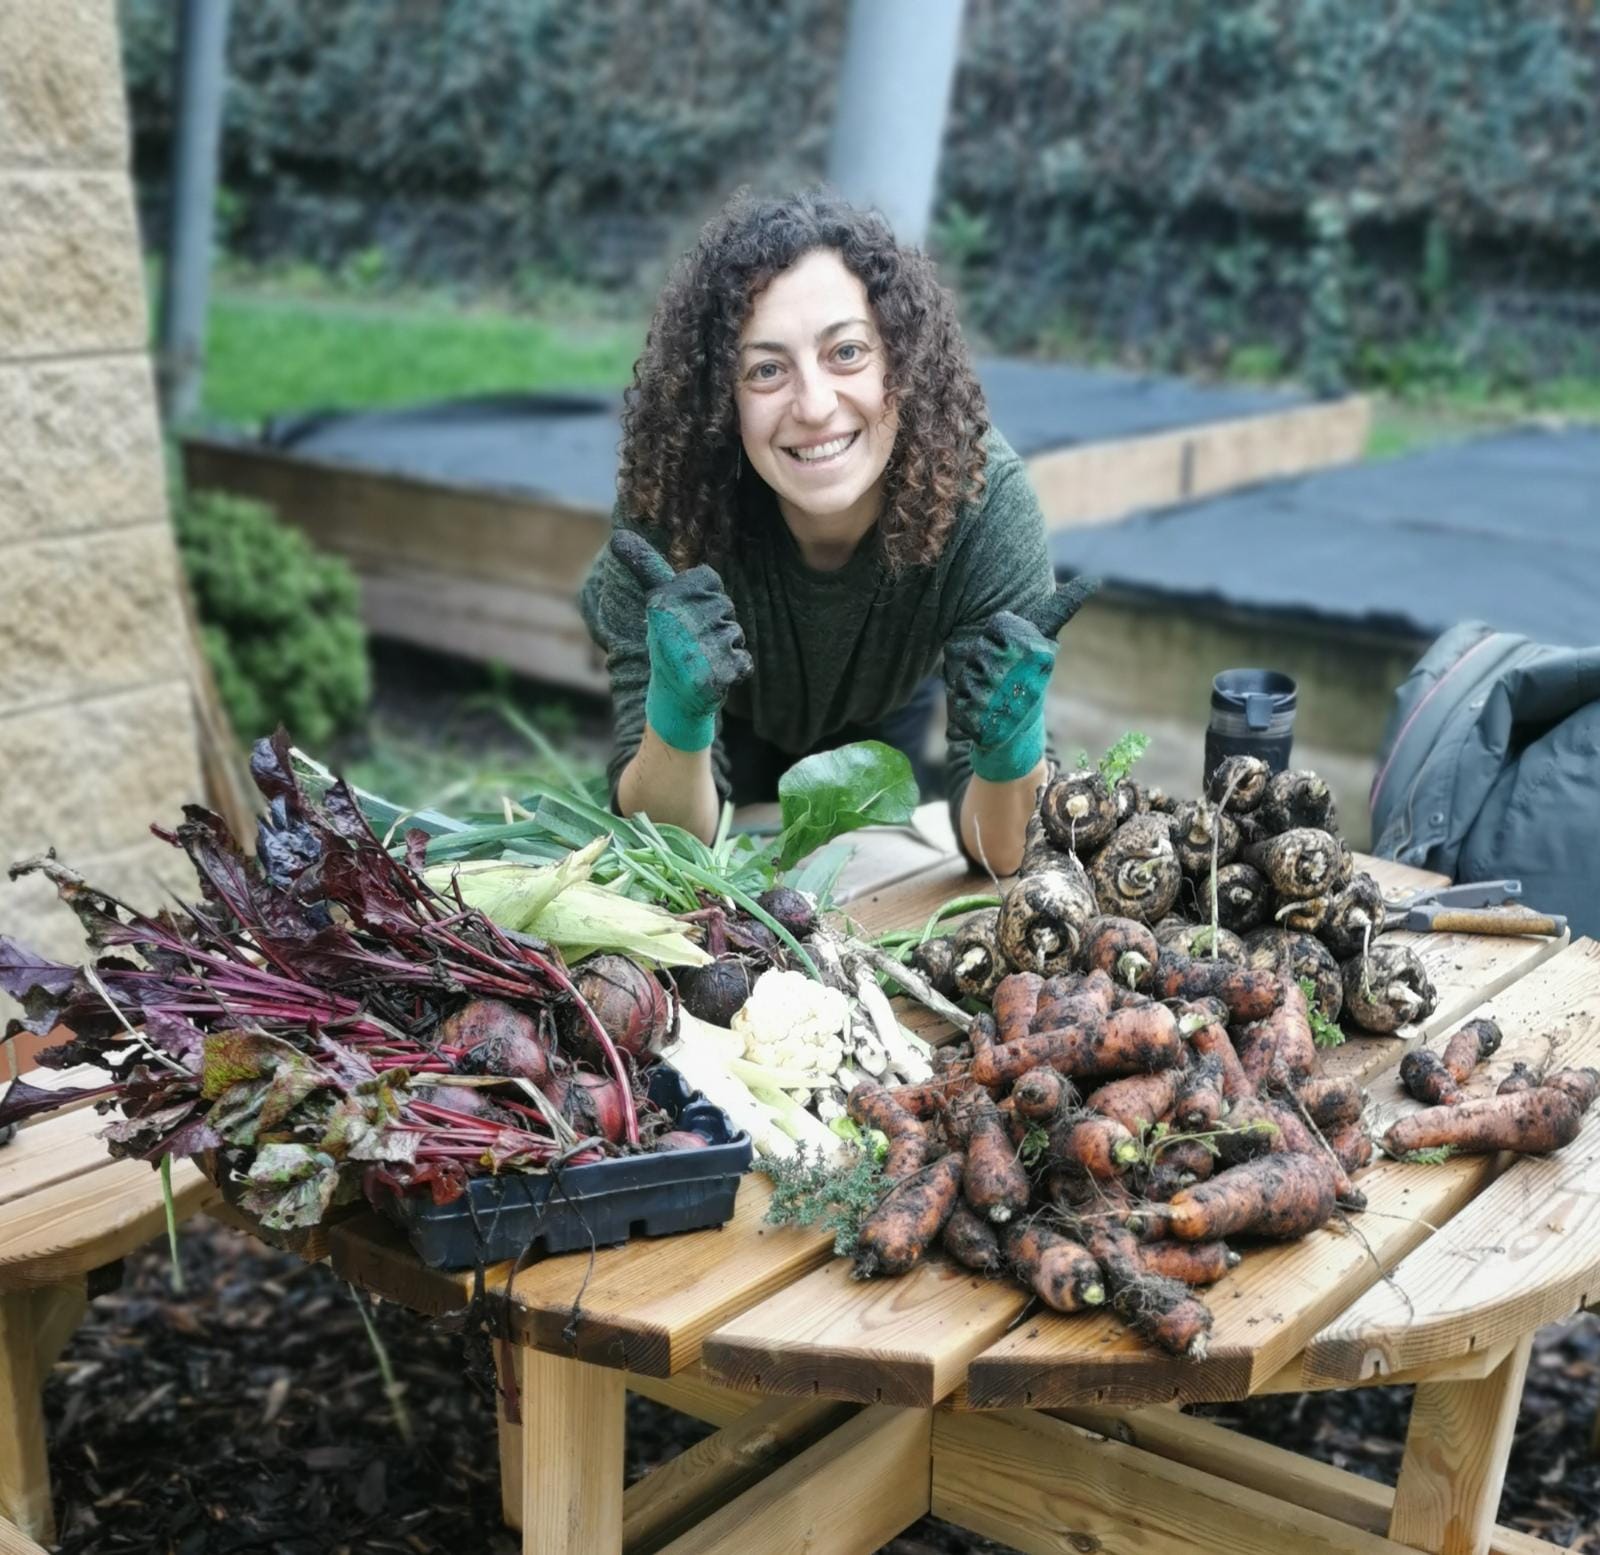 Charlotte Carson, Community Sustainability Lead at Frome Medical Practice, with produce grown in their home made compost